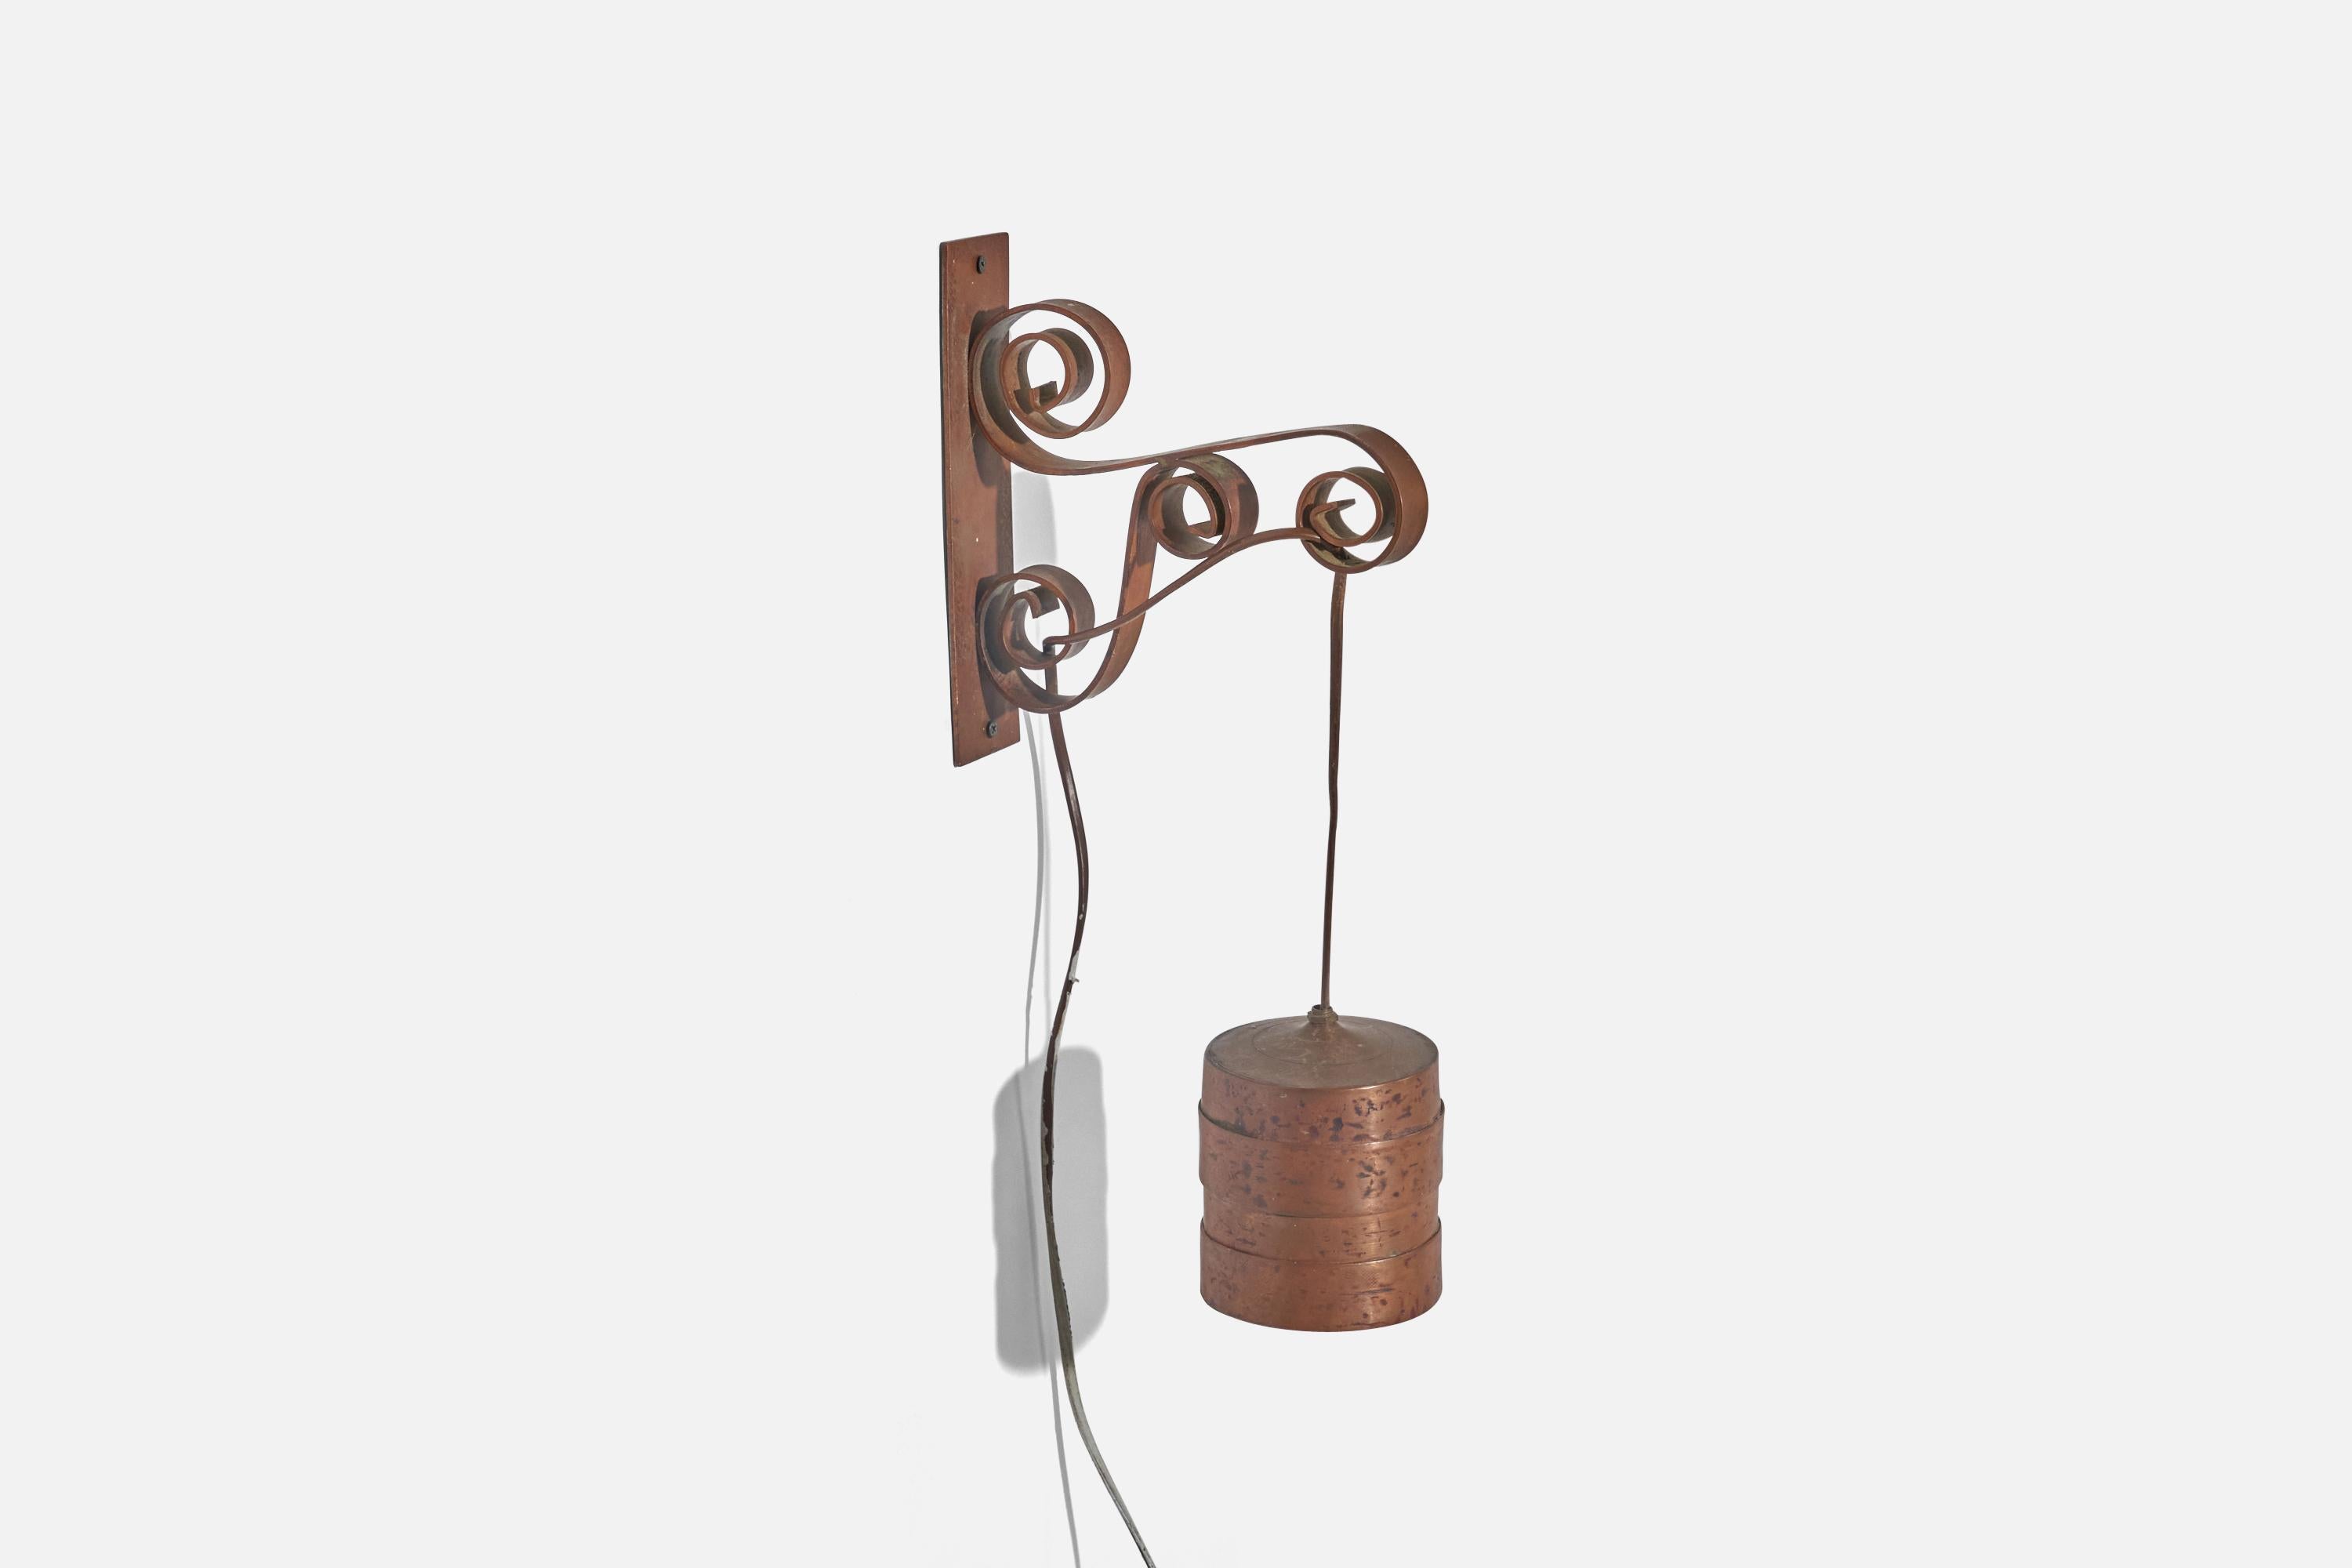 A copper sconce/ wall light designed and produced in Sweden, c. 1940s.

Dimensions variable, measured as illustrated in first image.

Socket takes E-14 bulb.

There is no maximum wattage stated on the fixture.

Dimensions of Back Plate